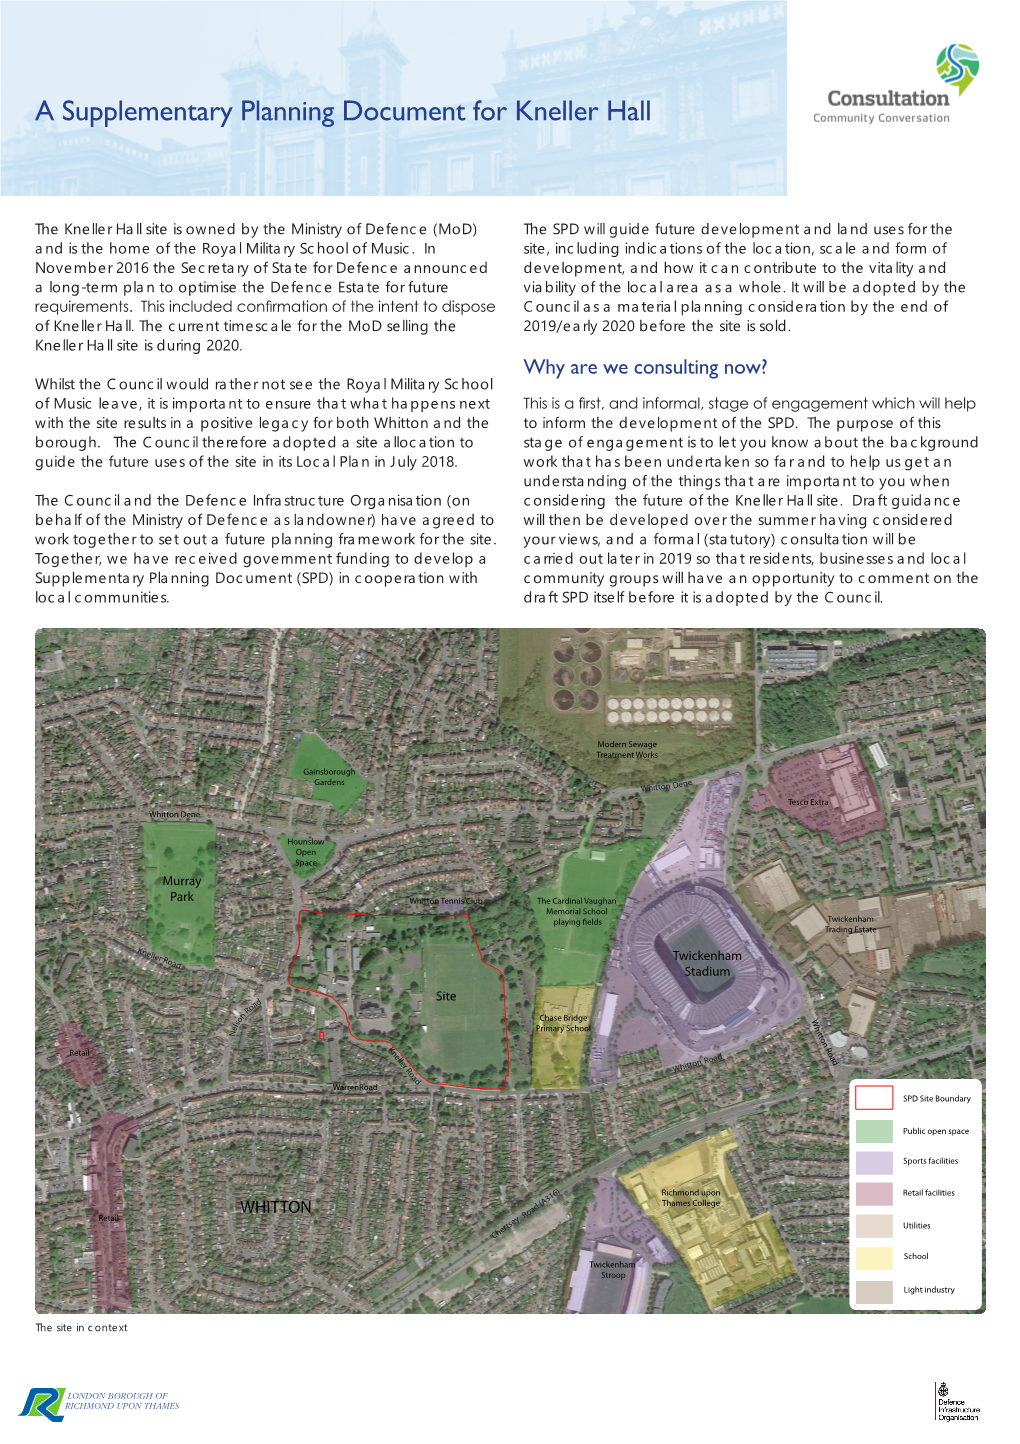 A Supplementary Planning Document for Kneller Hall